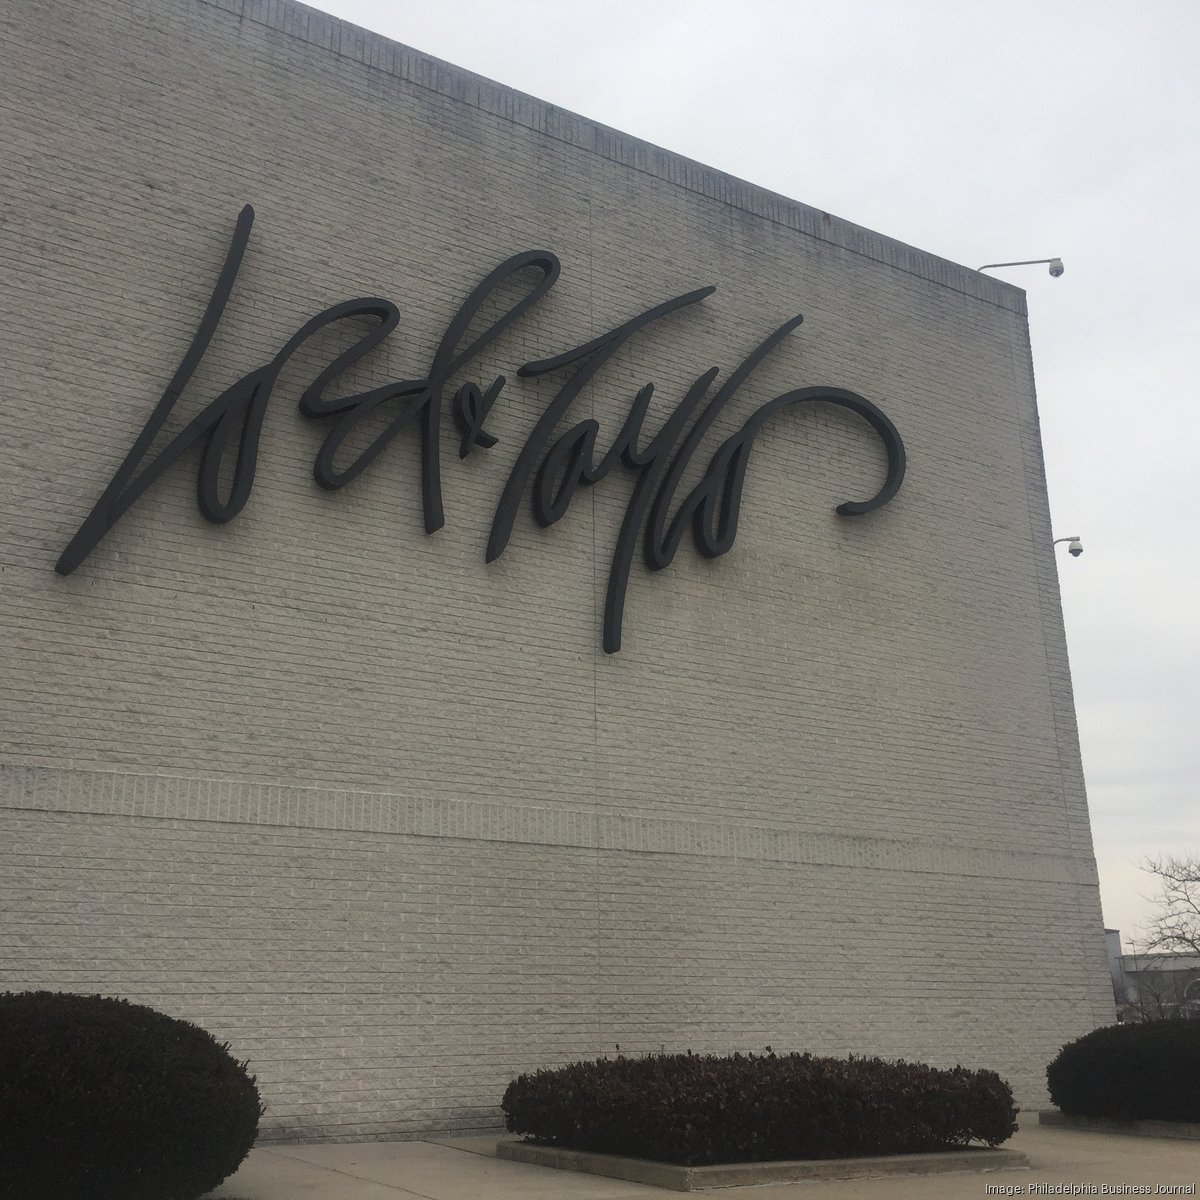 All 38 Lord & Taylor stores slated to close; see full list